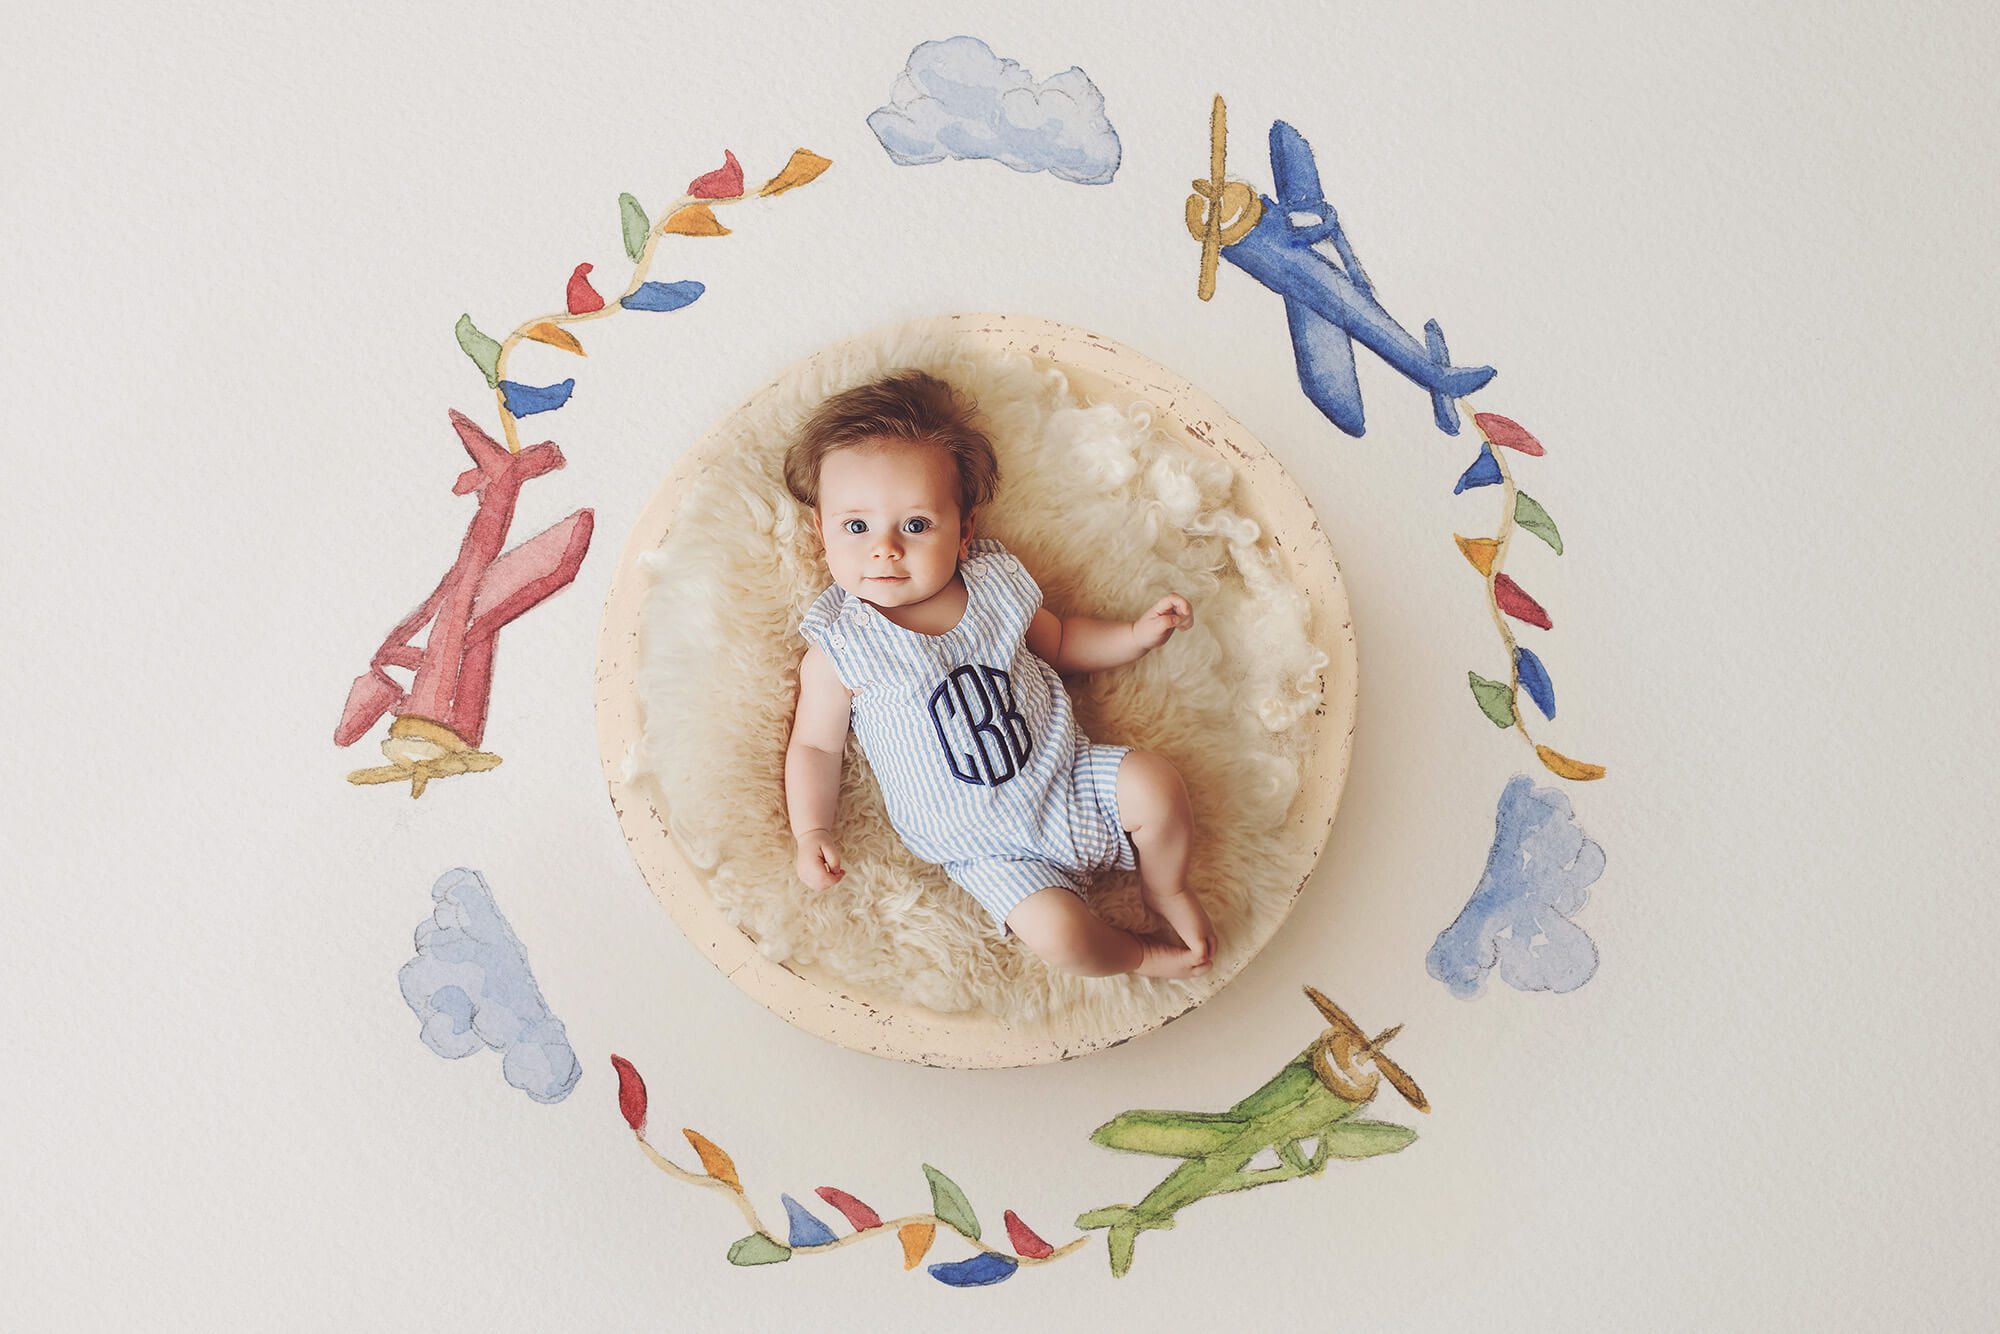 A three-month old baby boy laying in a wooden bowl surrounded by a backdrop of hand-drawn airplanes